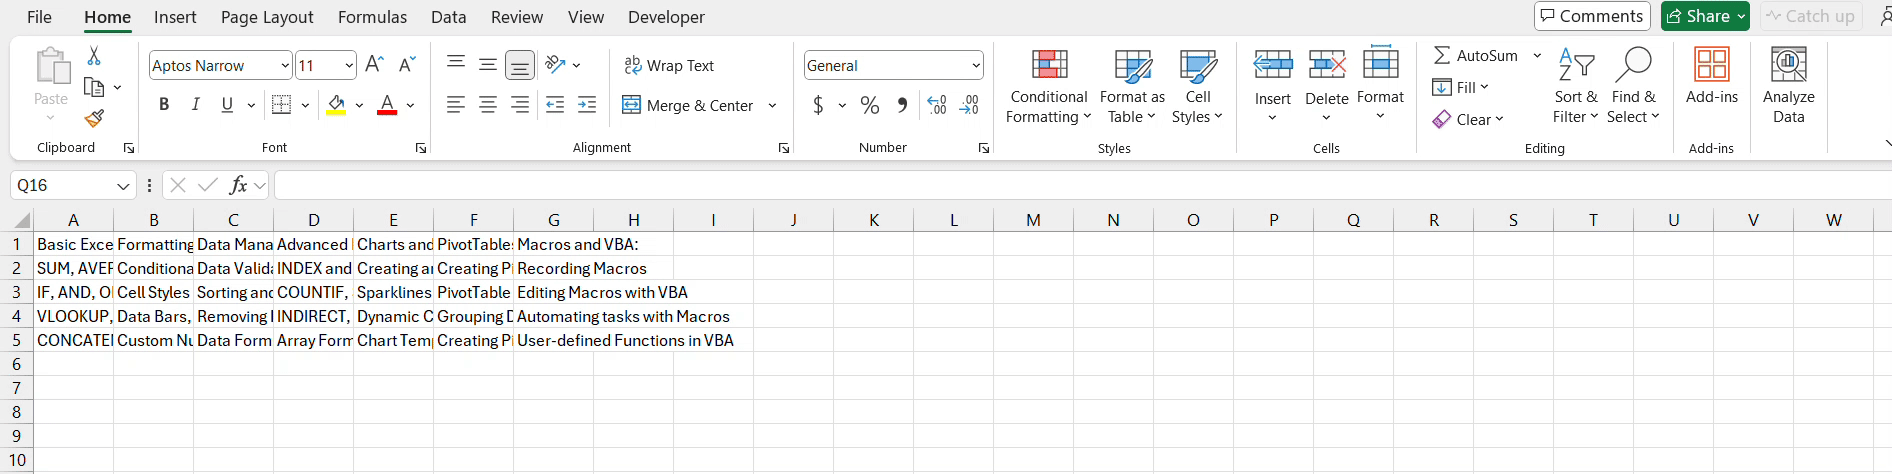 How to Make Cells Bigger in Excel